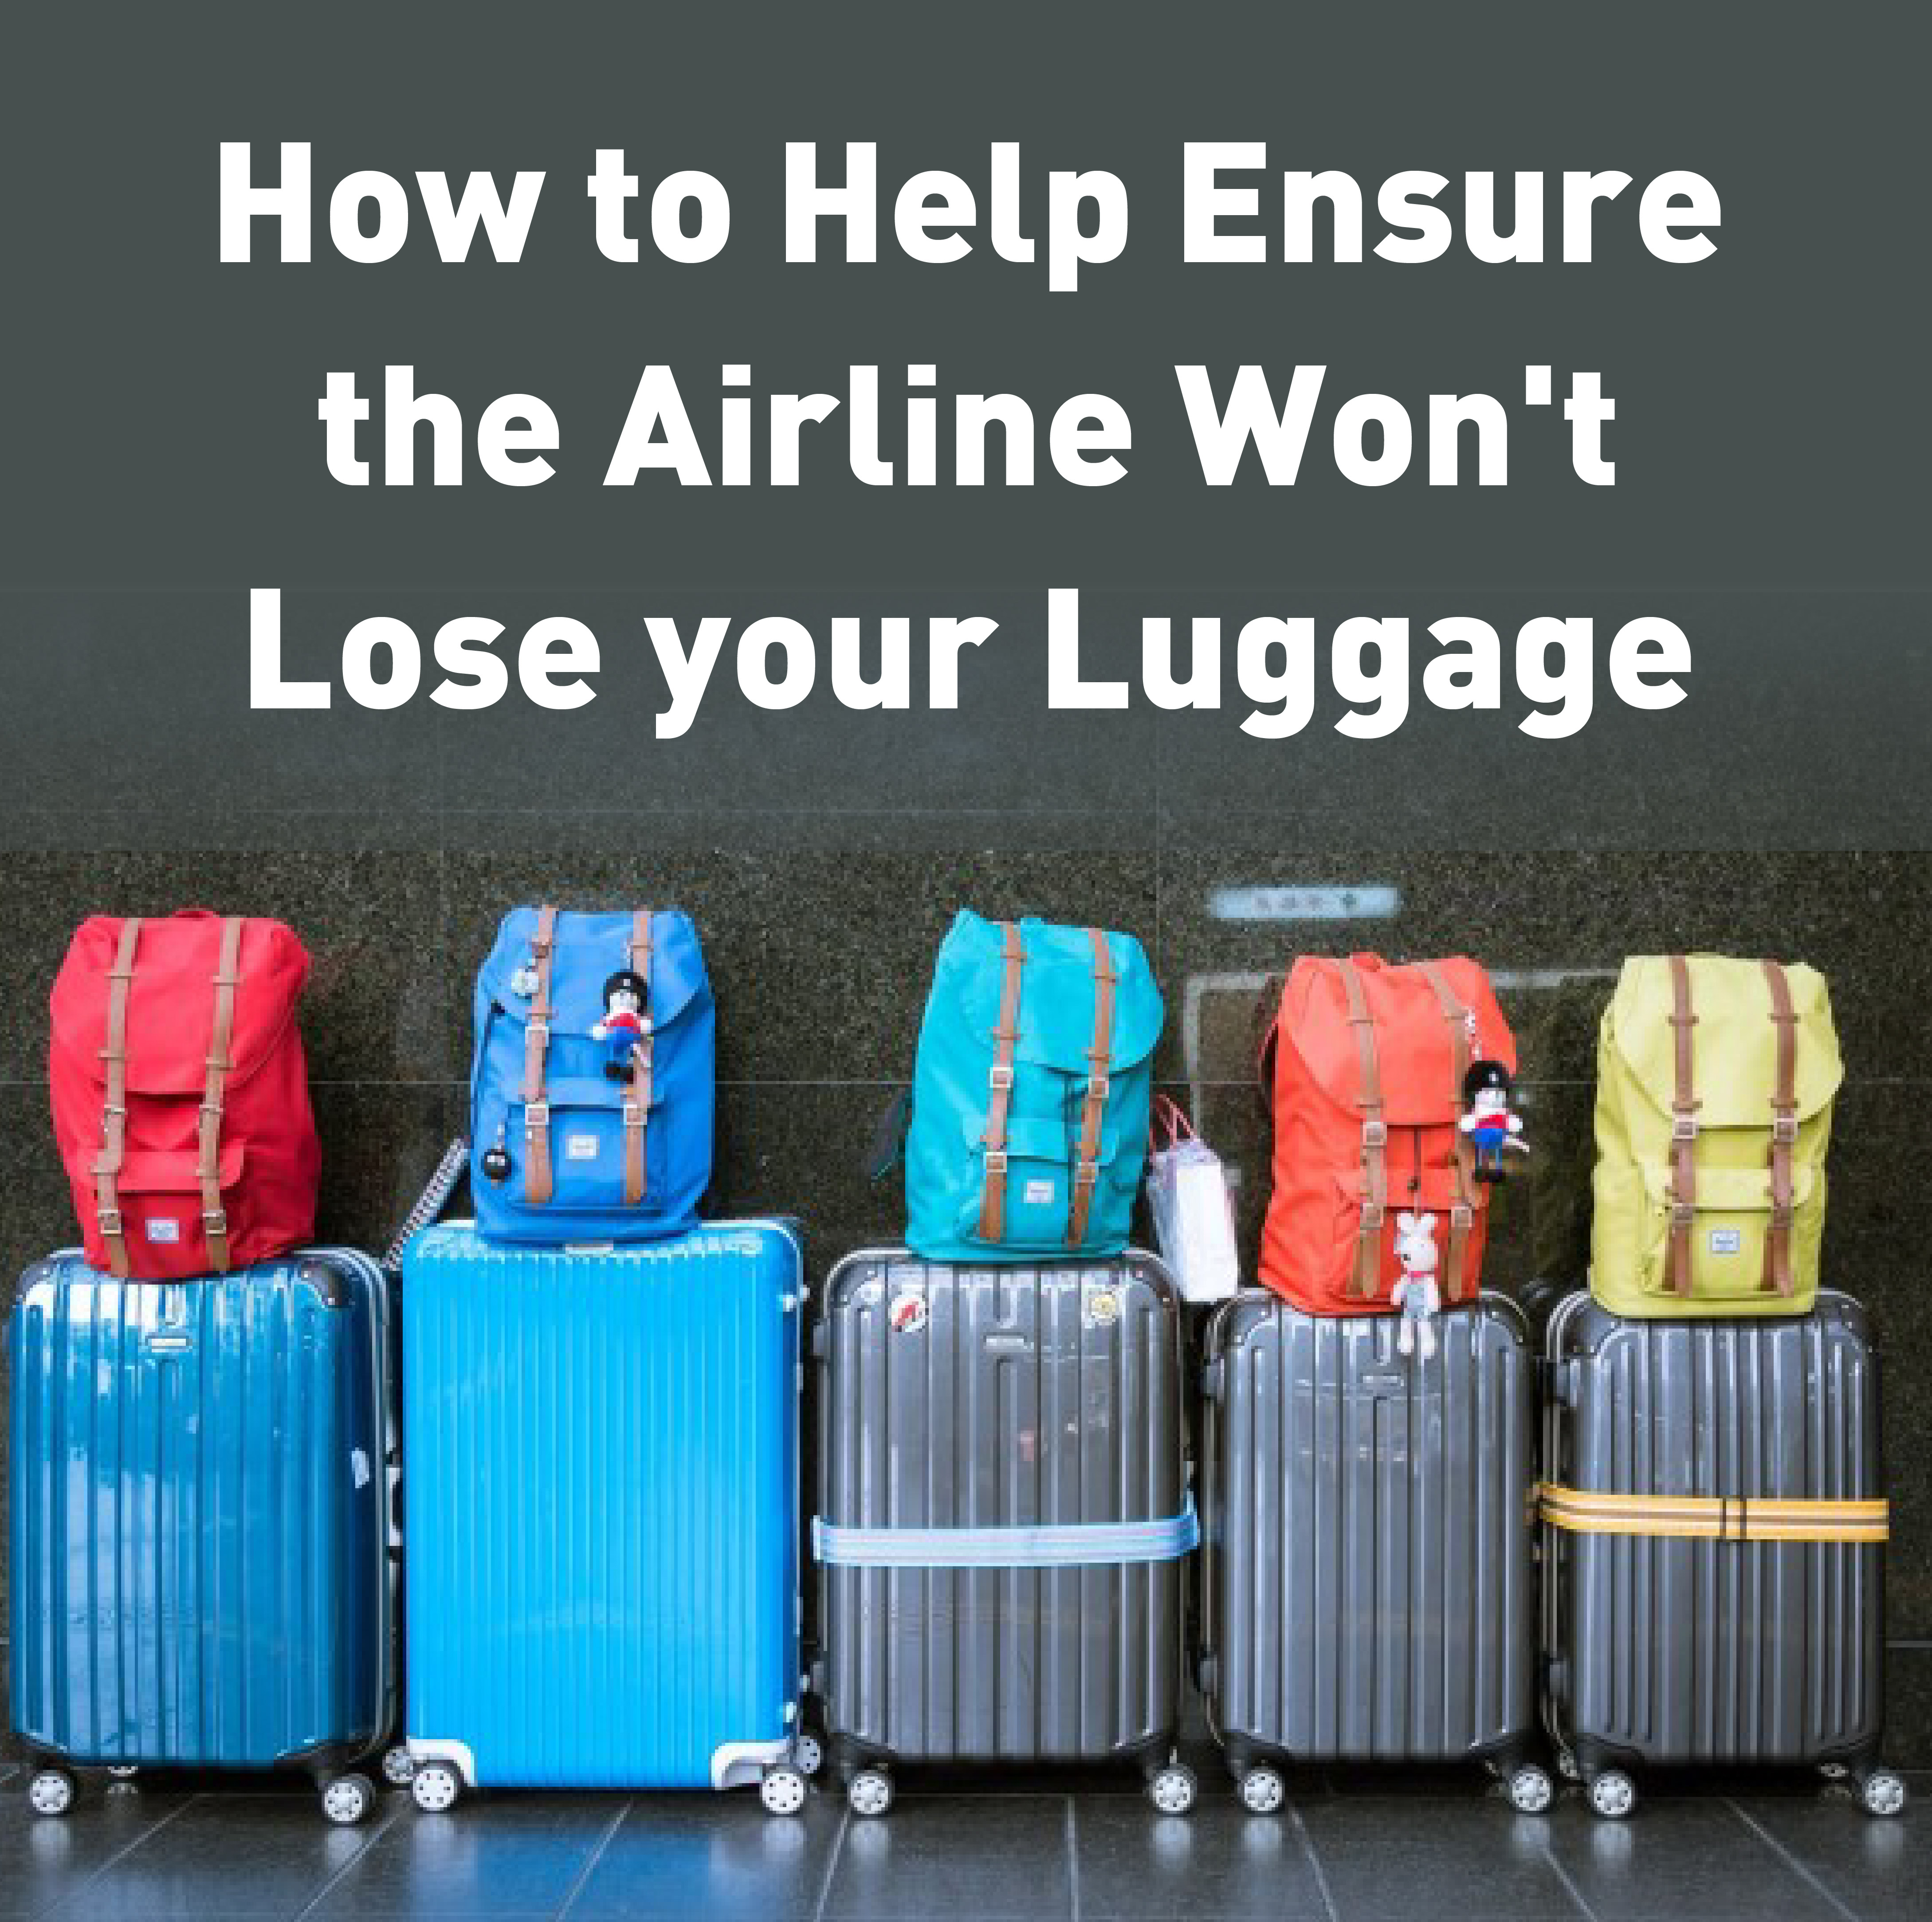 How to help ensure the airline won't lose your luggage